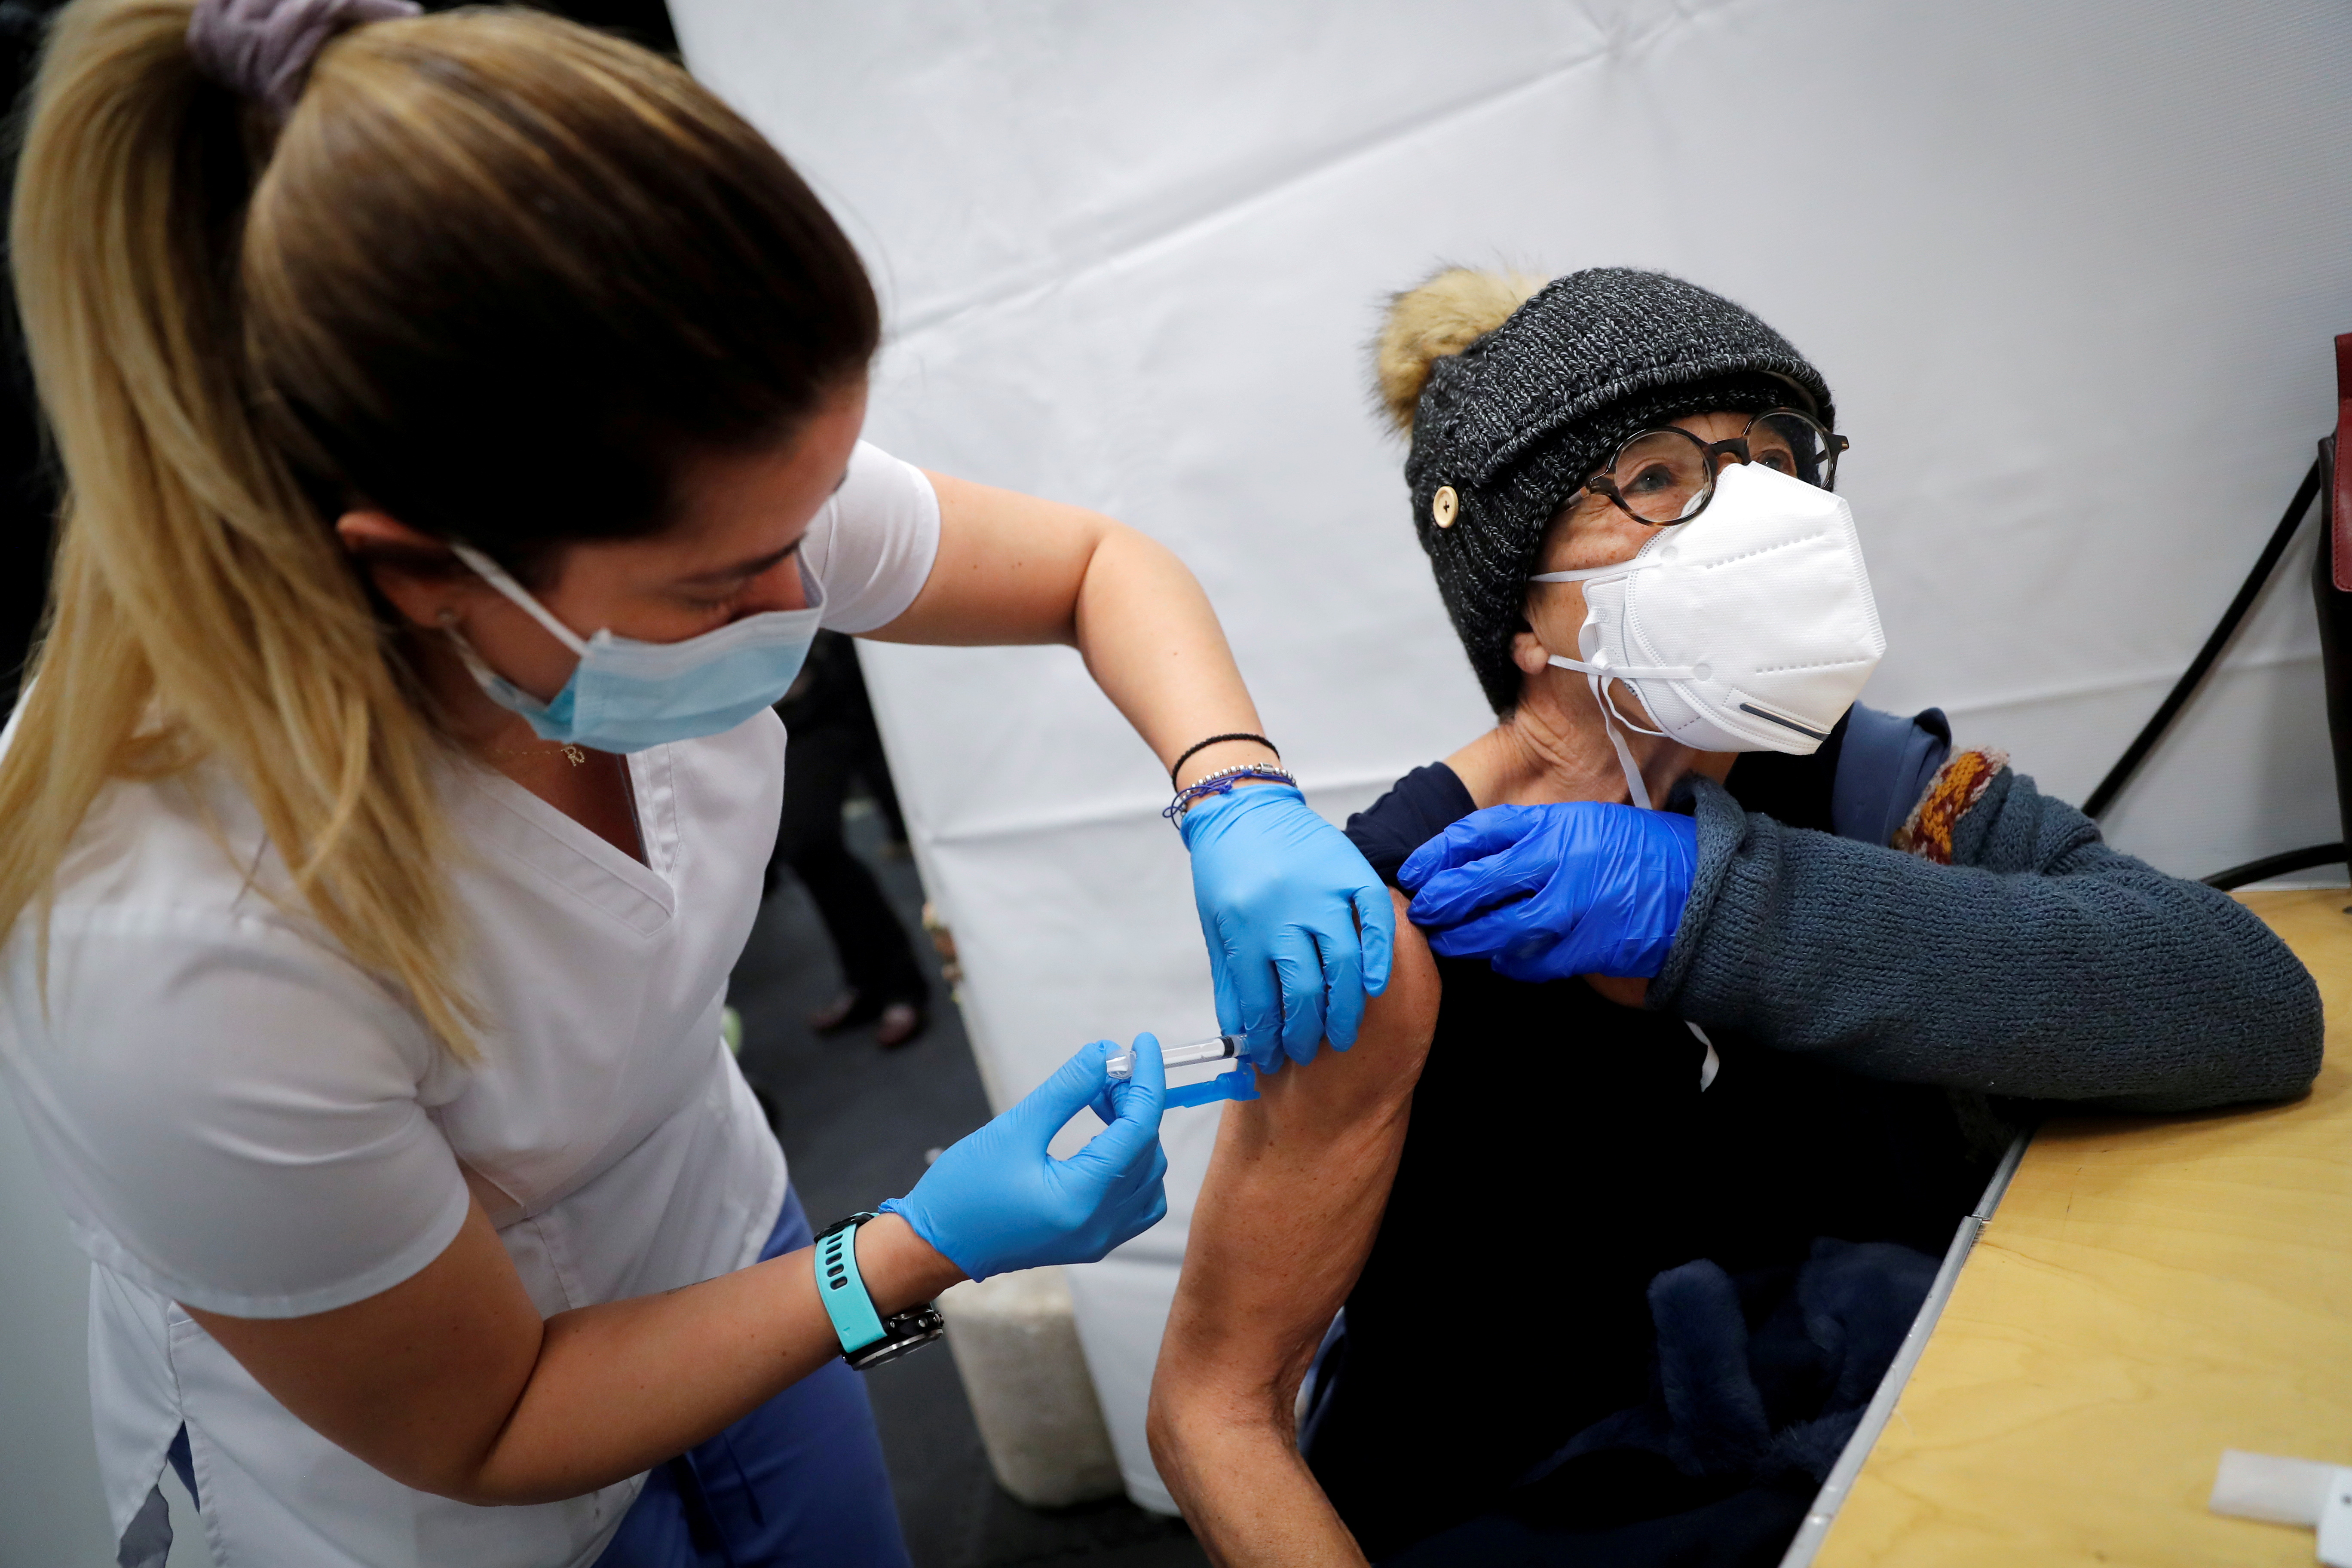 A healthcare worker administers a shot of the Moderna COVID-19 Vaccine to a woman at a pop-up vaccination site operated by SOMOS Community Care during the coronavirus disease (COVID-19) pandemic in Manhattan in New York City, New York, U.S., January 29, 2021. REUTERS/Mike Segar